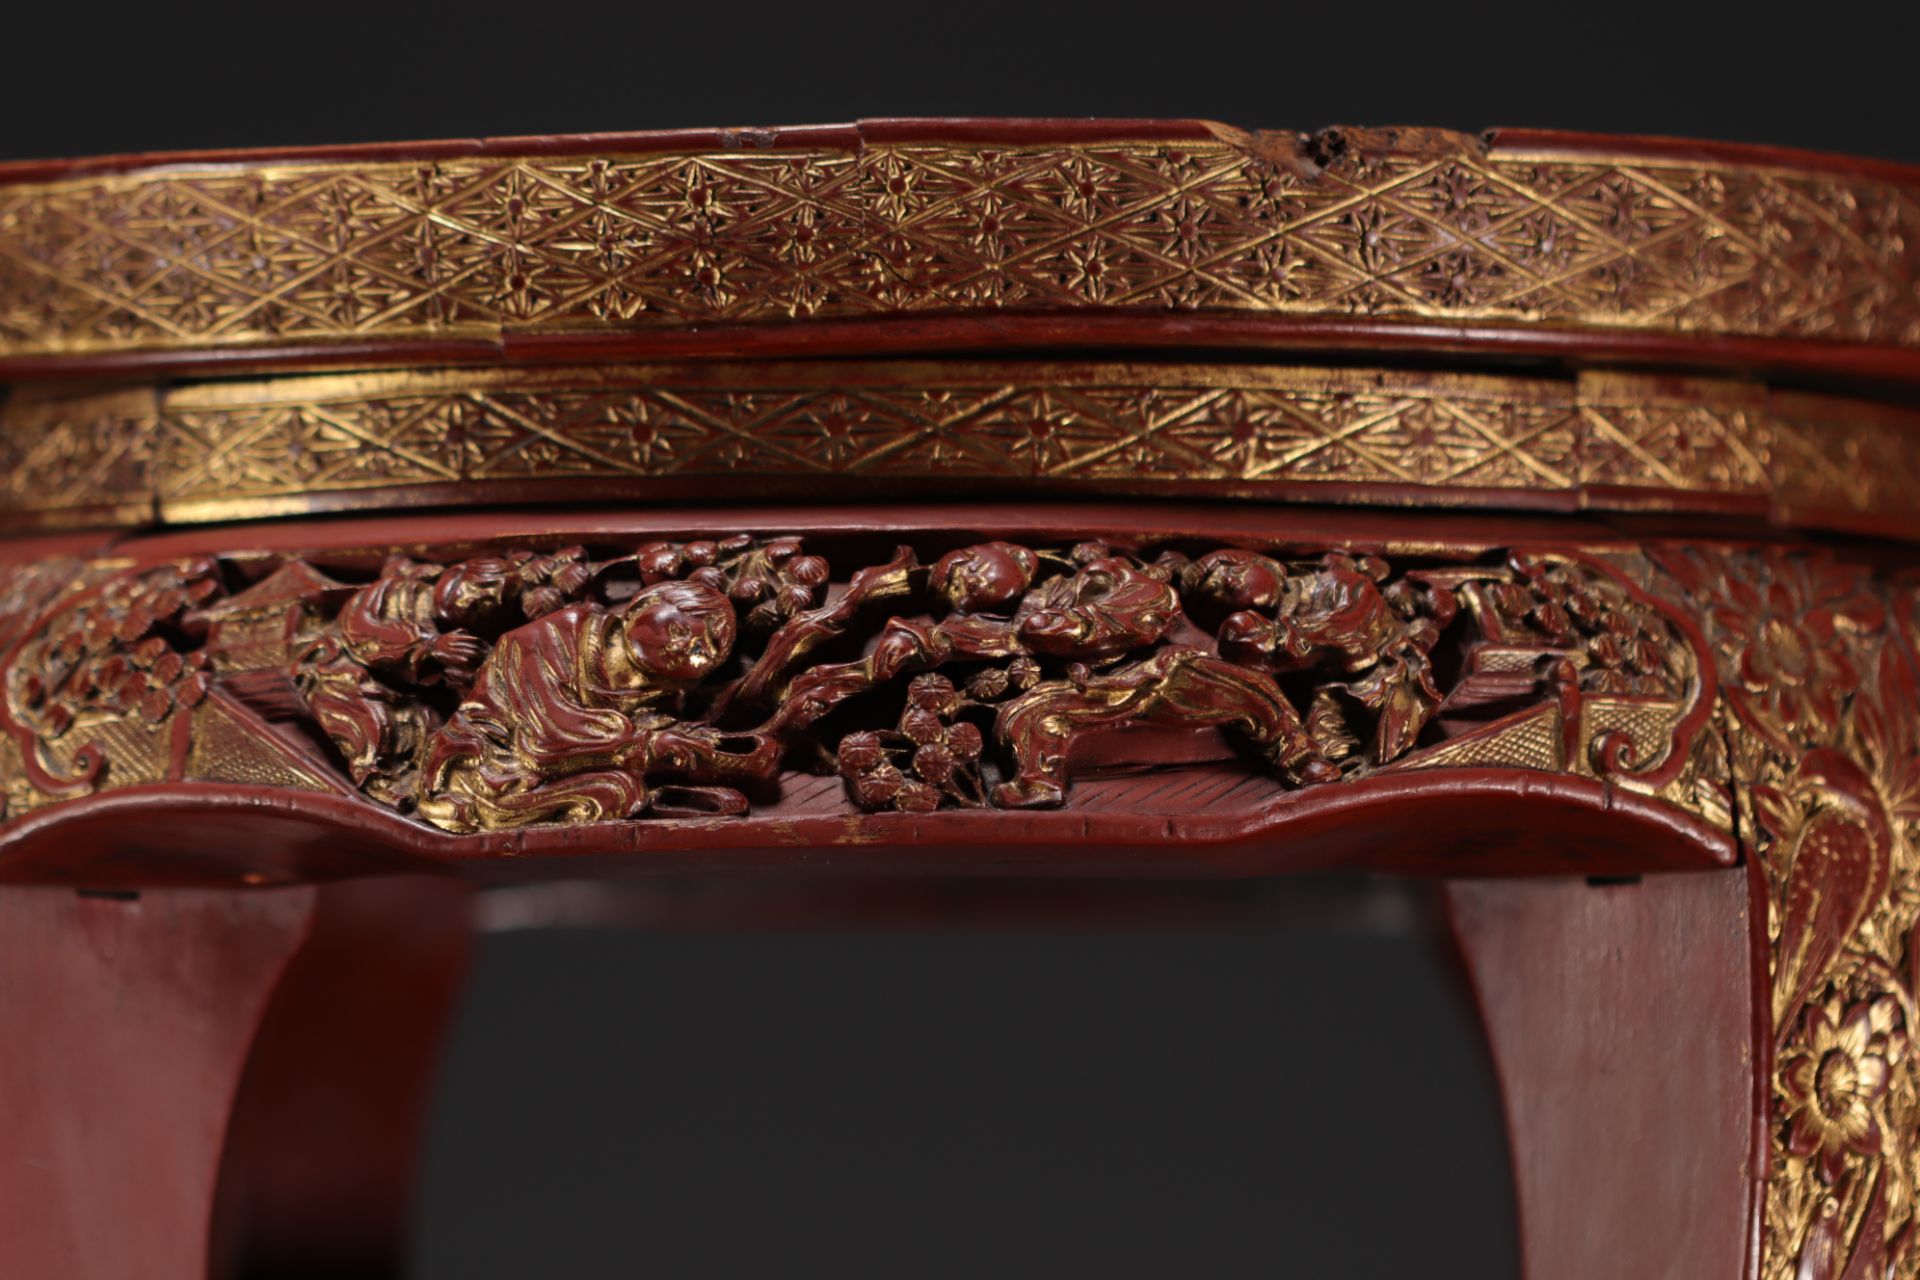 China - Small red and gold lacquer side table with carved figures and floral motifs, late 19th centu - Image 4 of 4